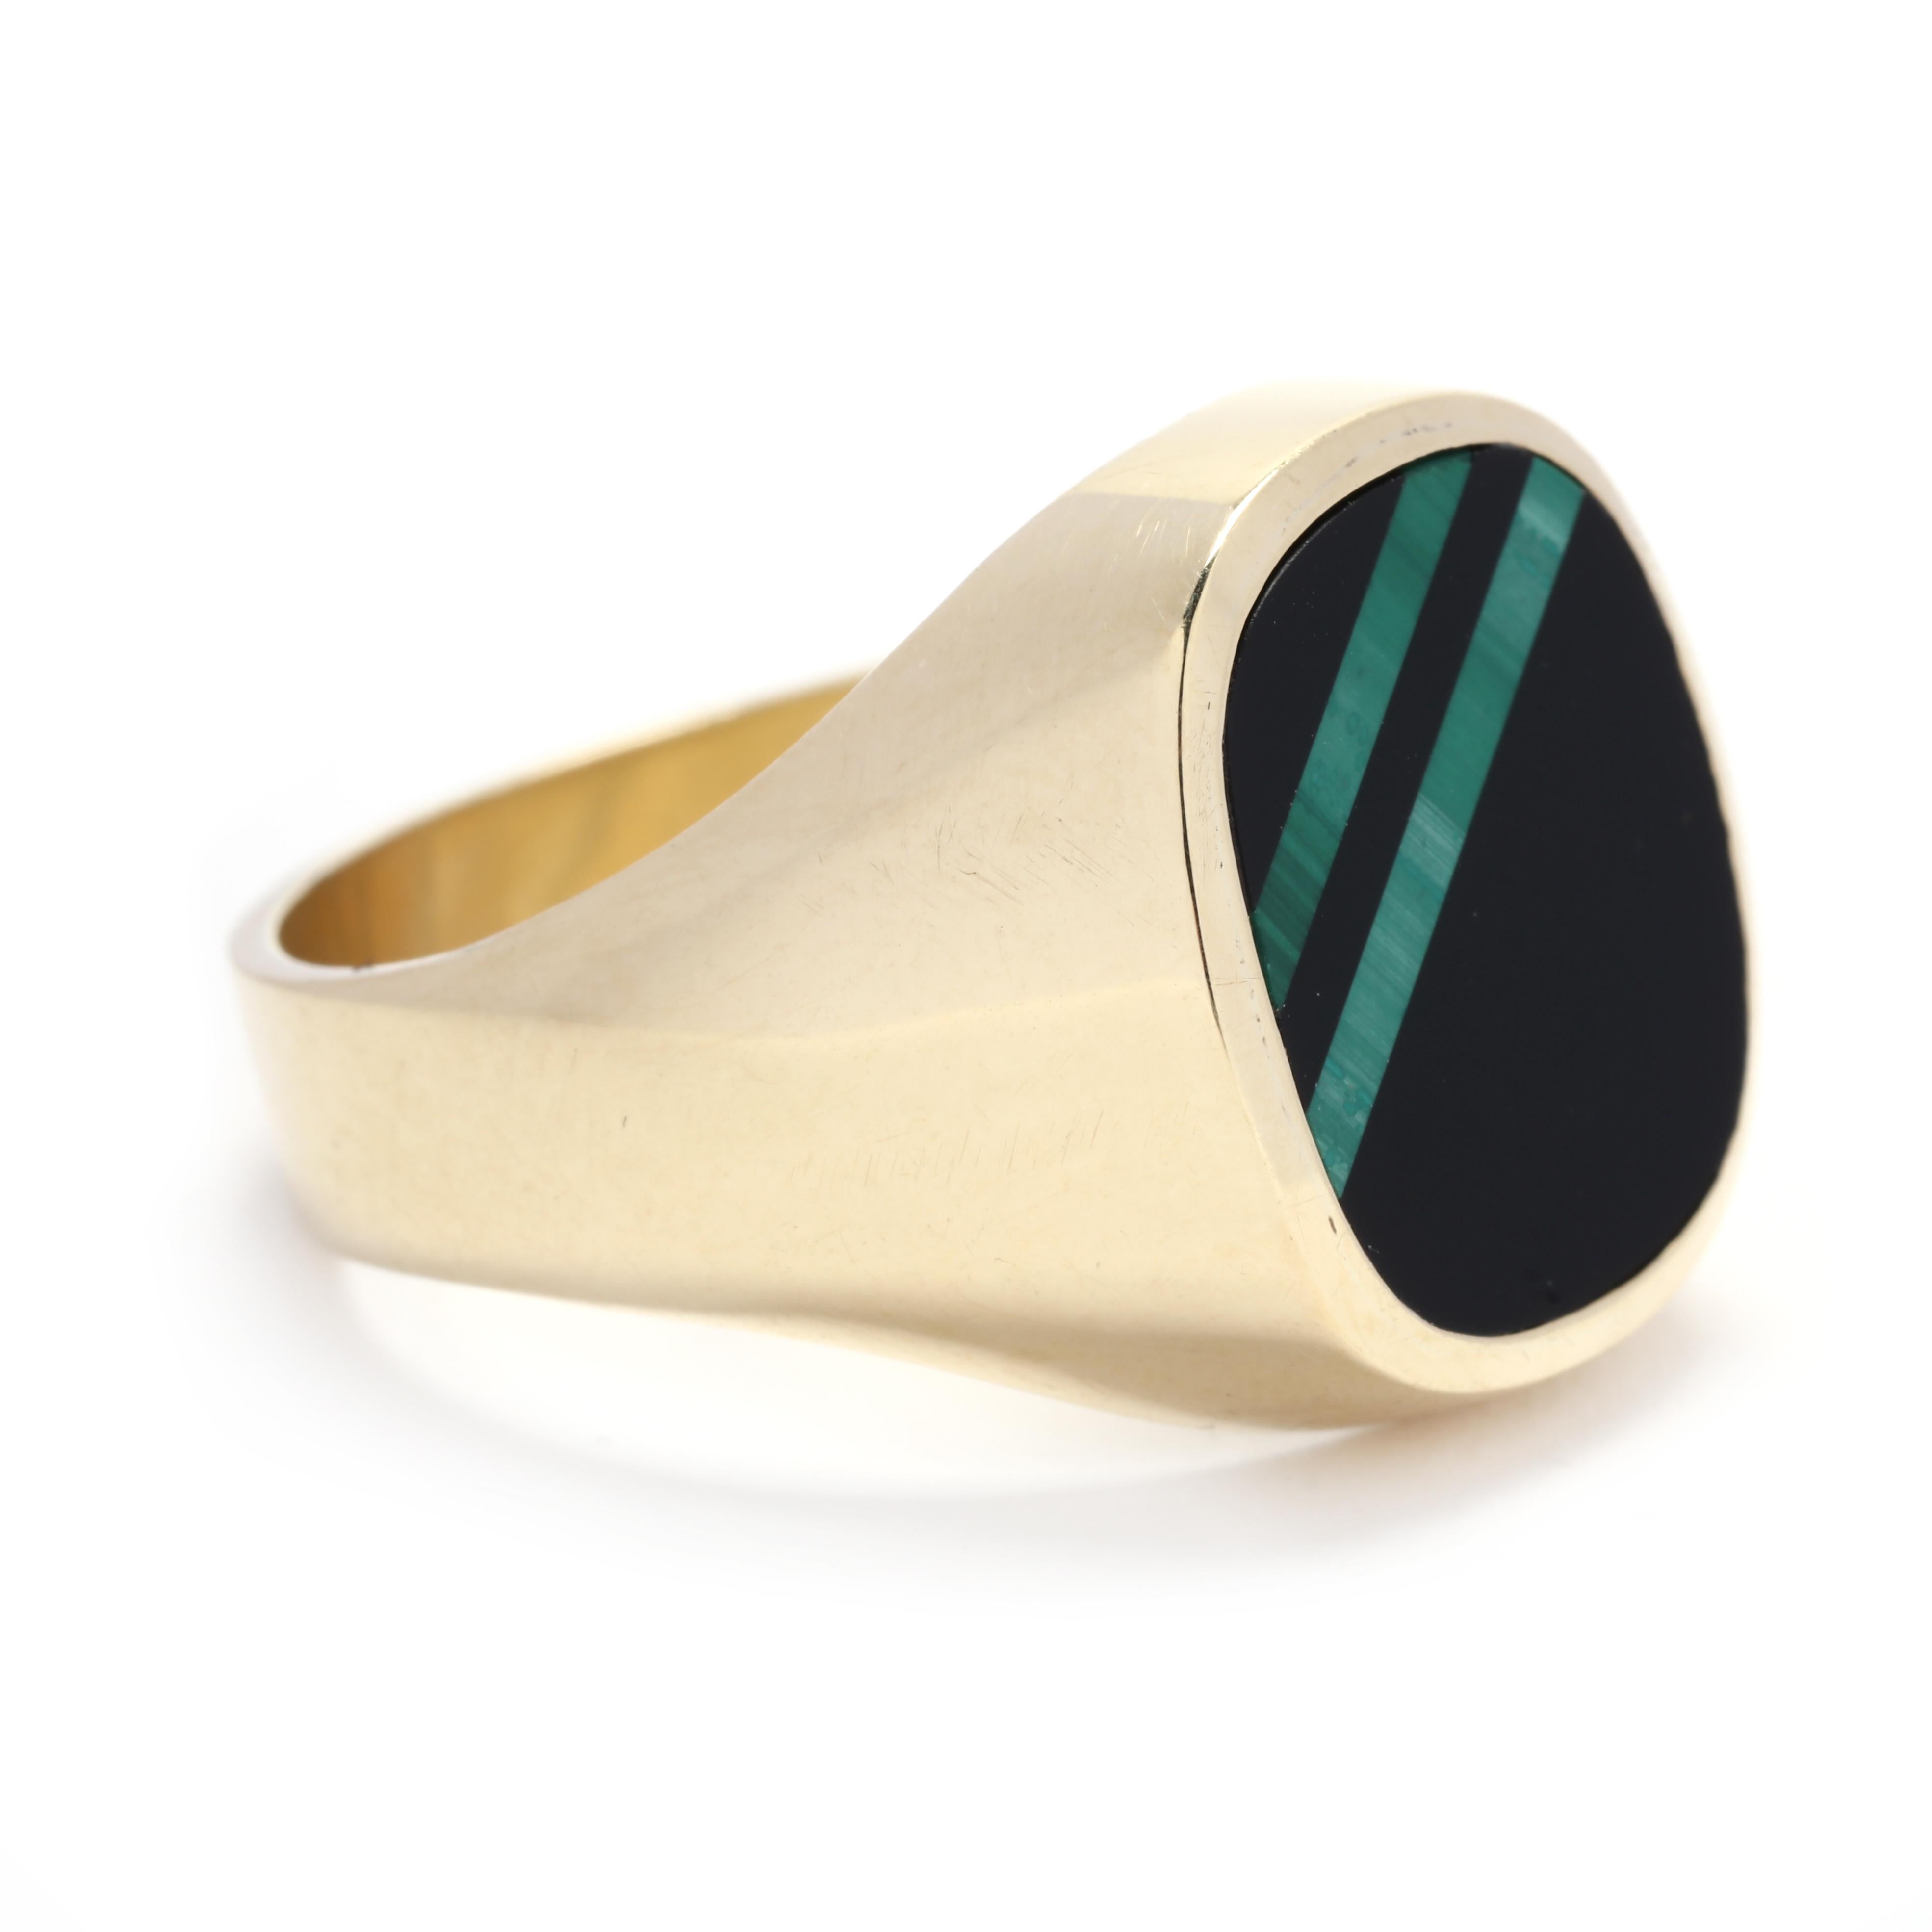 Featuring a large black onyx stone and a smaller malachite stone, this ring showcases a beautiful contrast of colors and textures. The black onyx is sleek and modern, while the malachite offers a vibrant pop of green. Together, they create a